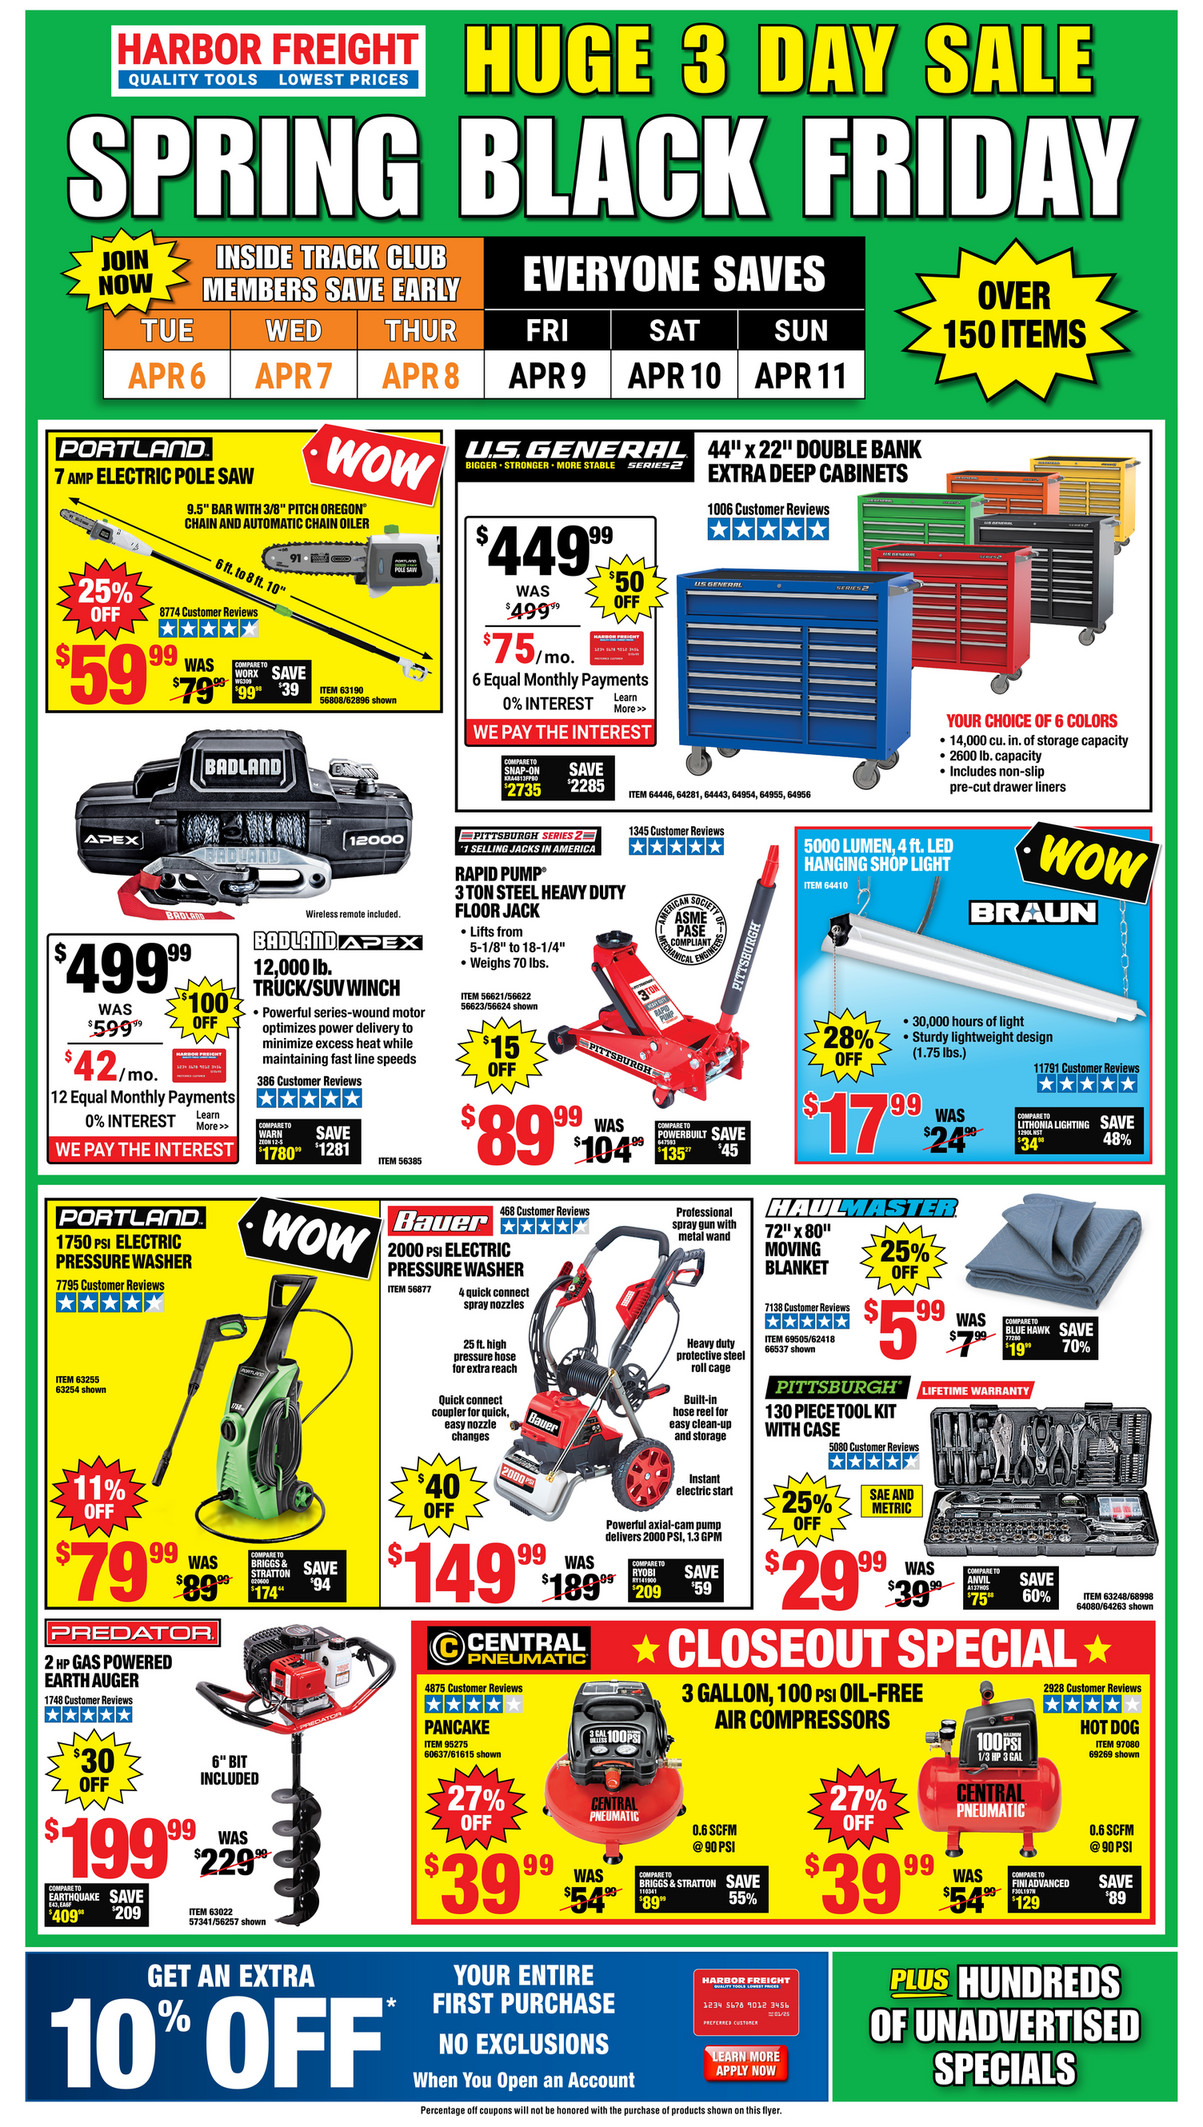 Harbor Freight Tools Spring Black Friday Sale Page 1